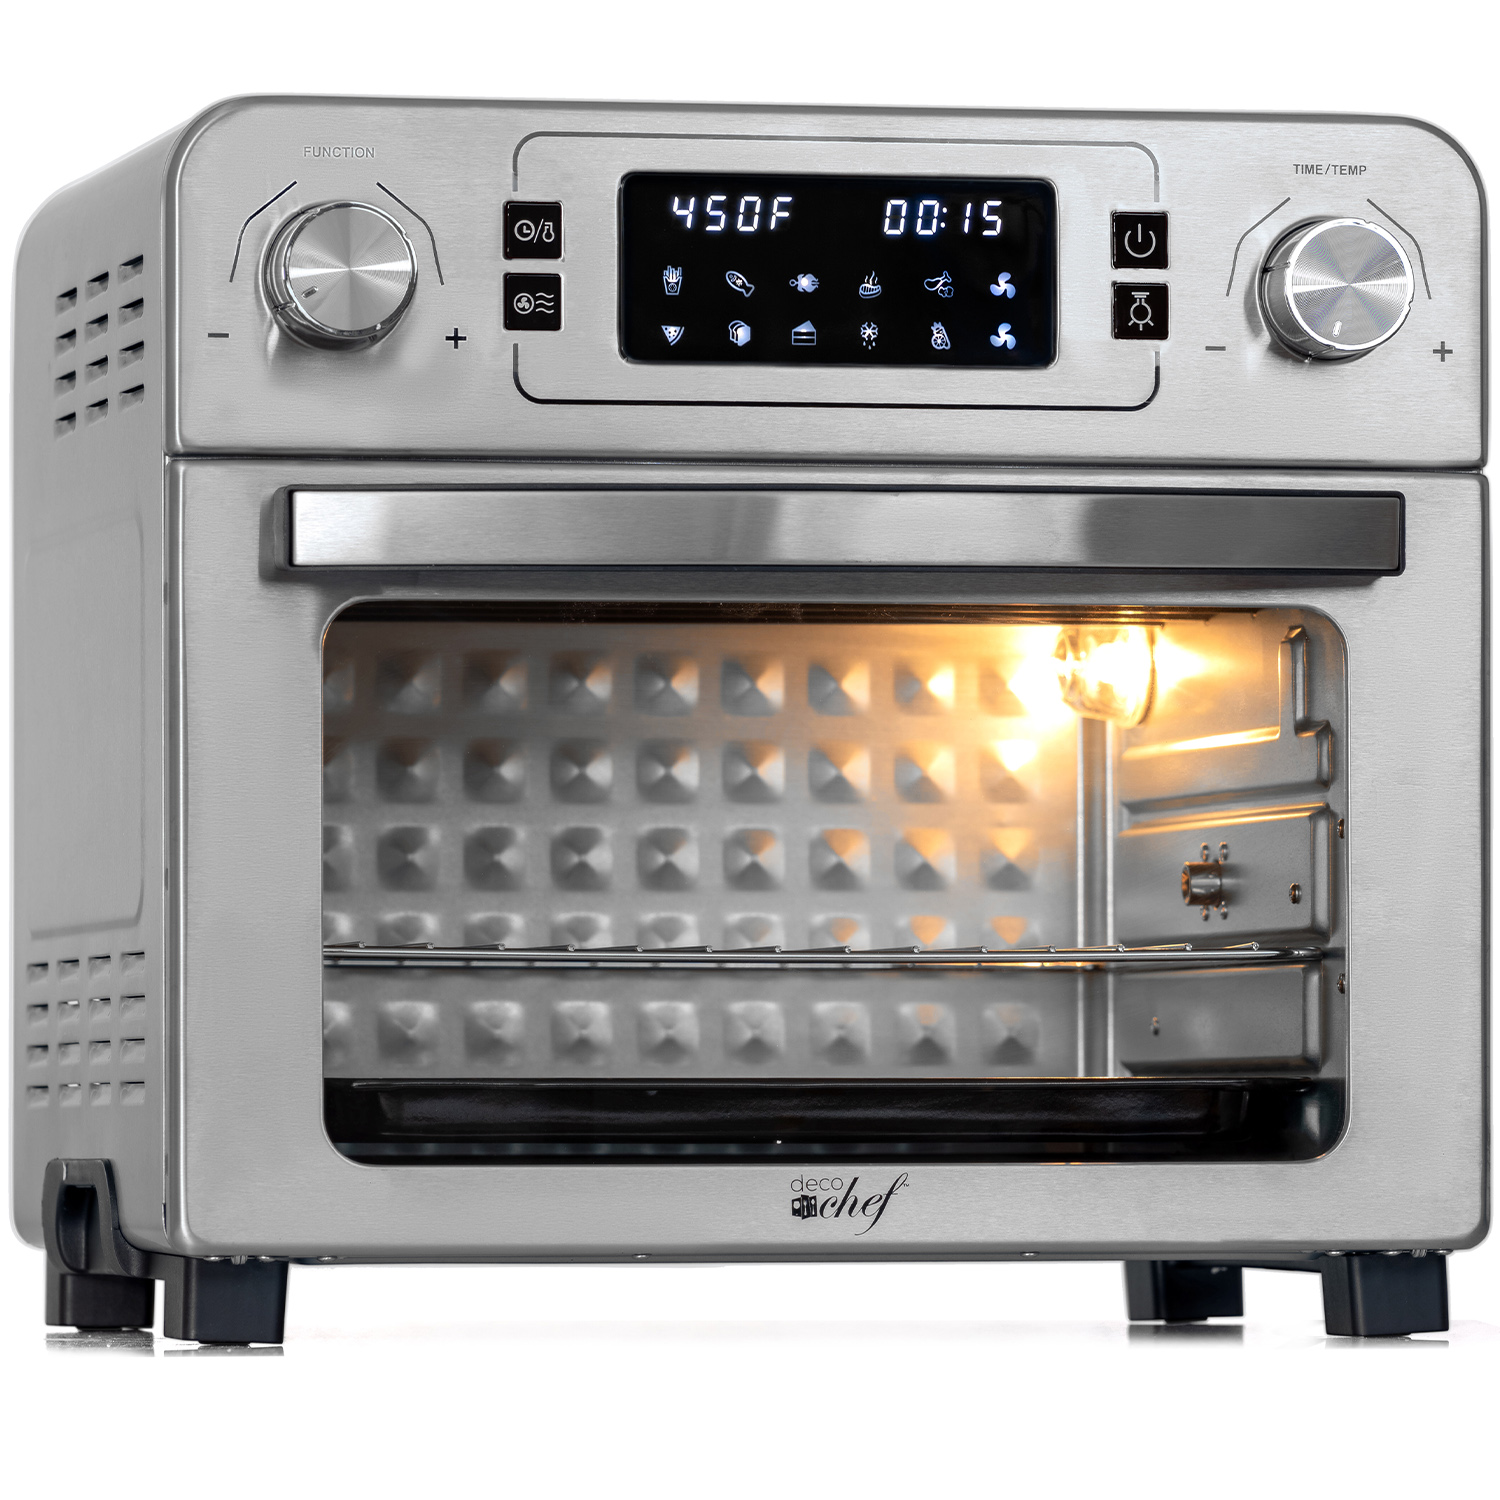 Deco Chef 24 QT Stainless Steel Countertop 1700 Watt Toaster Oven with Built-in Air Fryer and Included Rotisserie Assembly, Grill Rack, Frying Basket, and Baking Pan - image 8 of 11